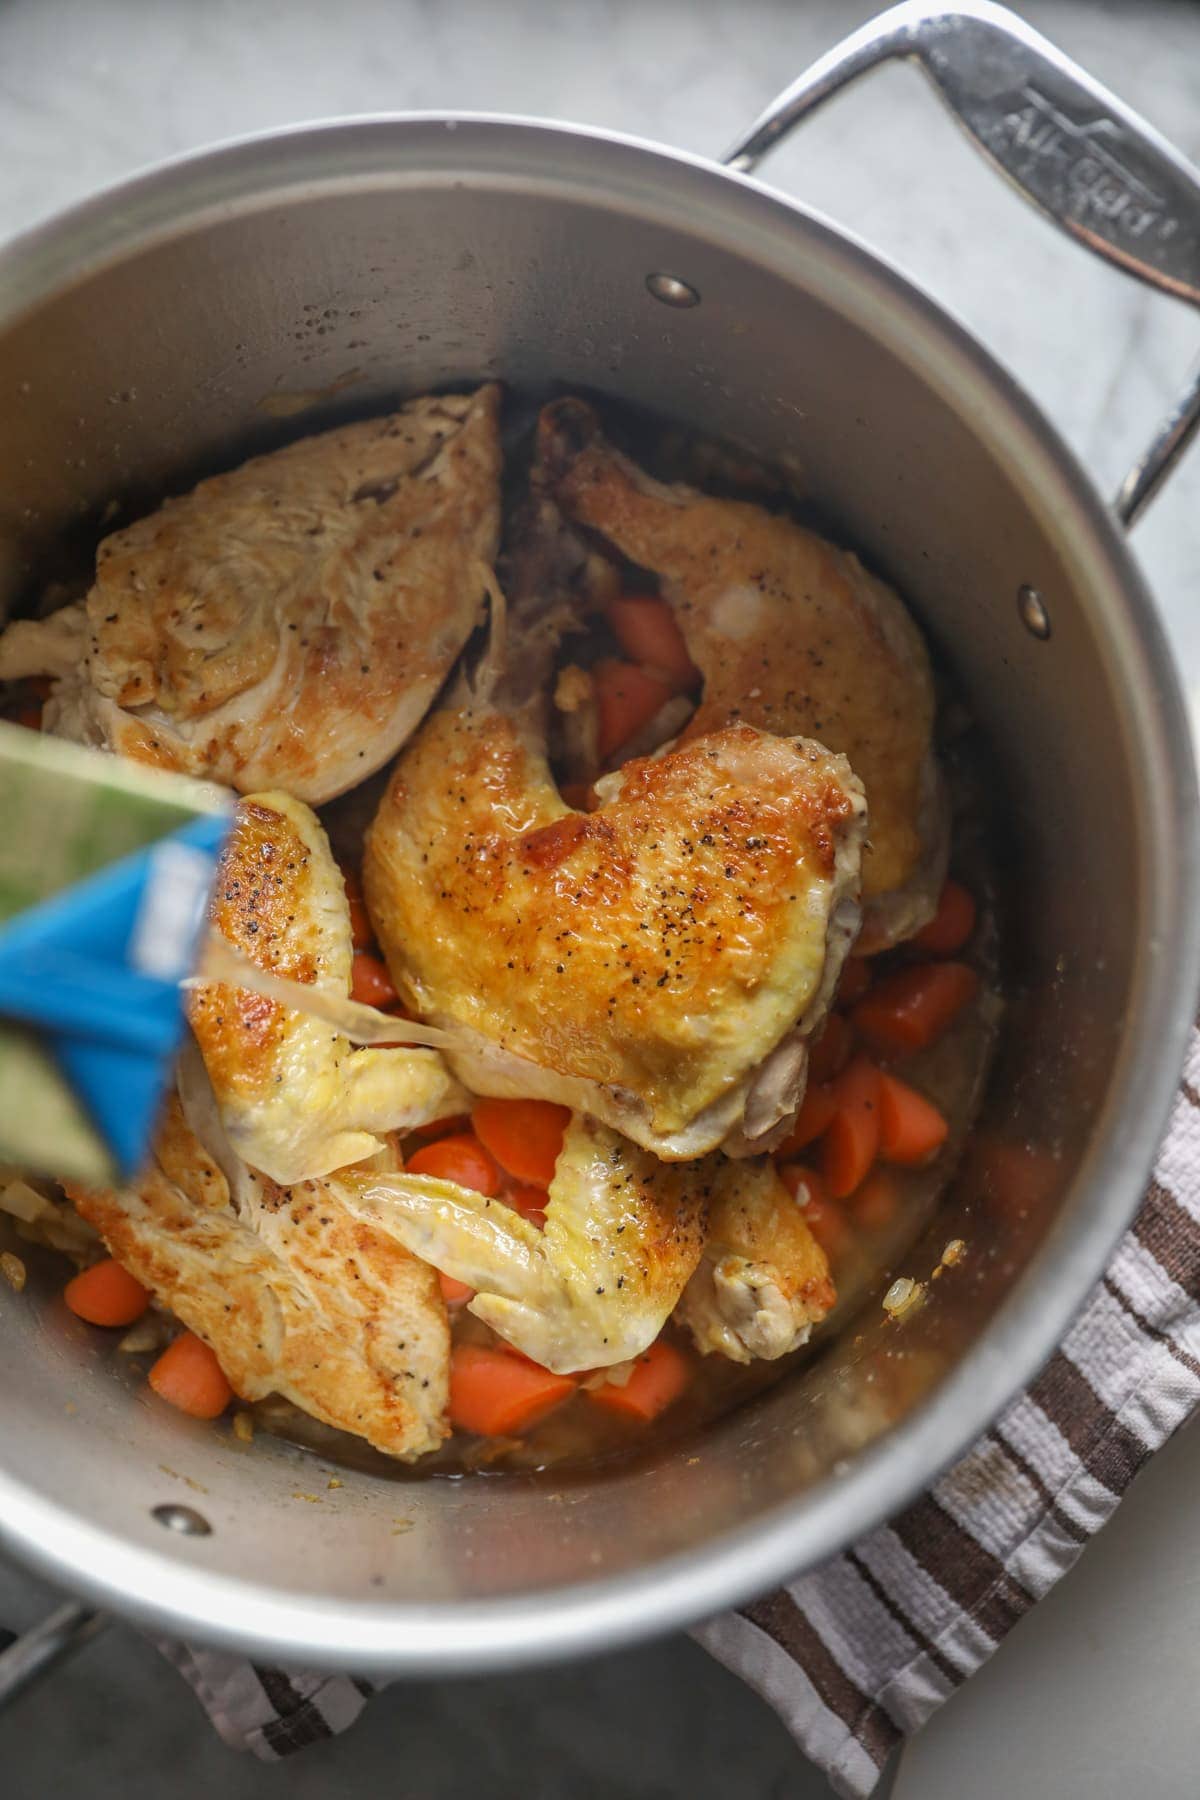 Chicken, carrots, and onions in a pot on the stove